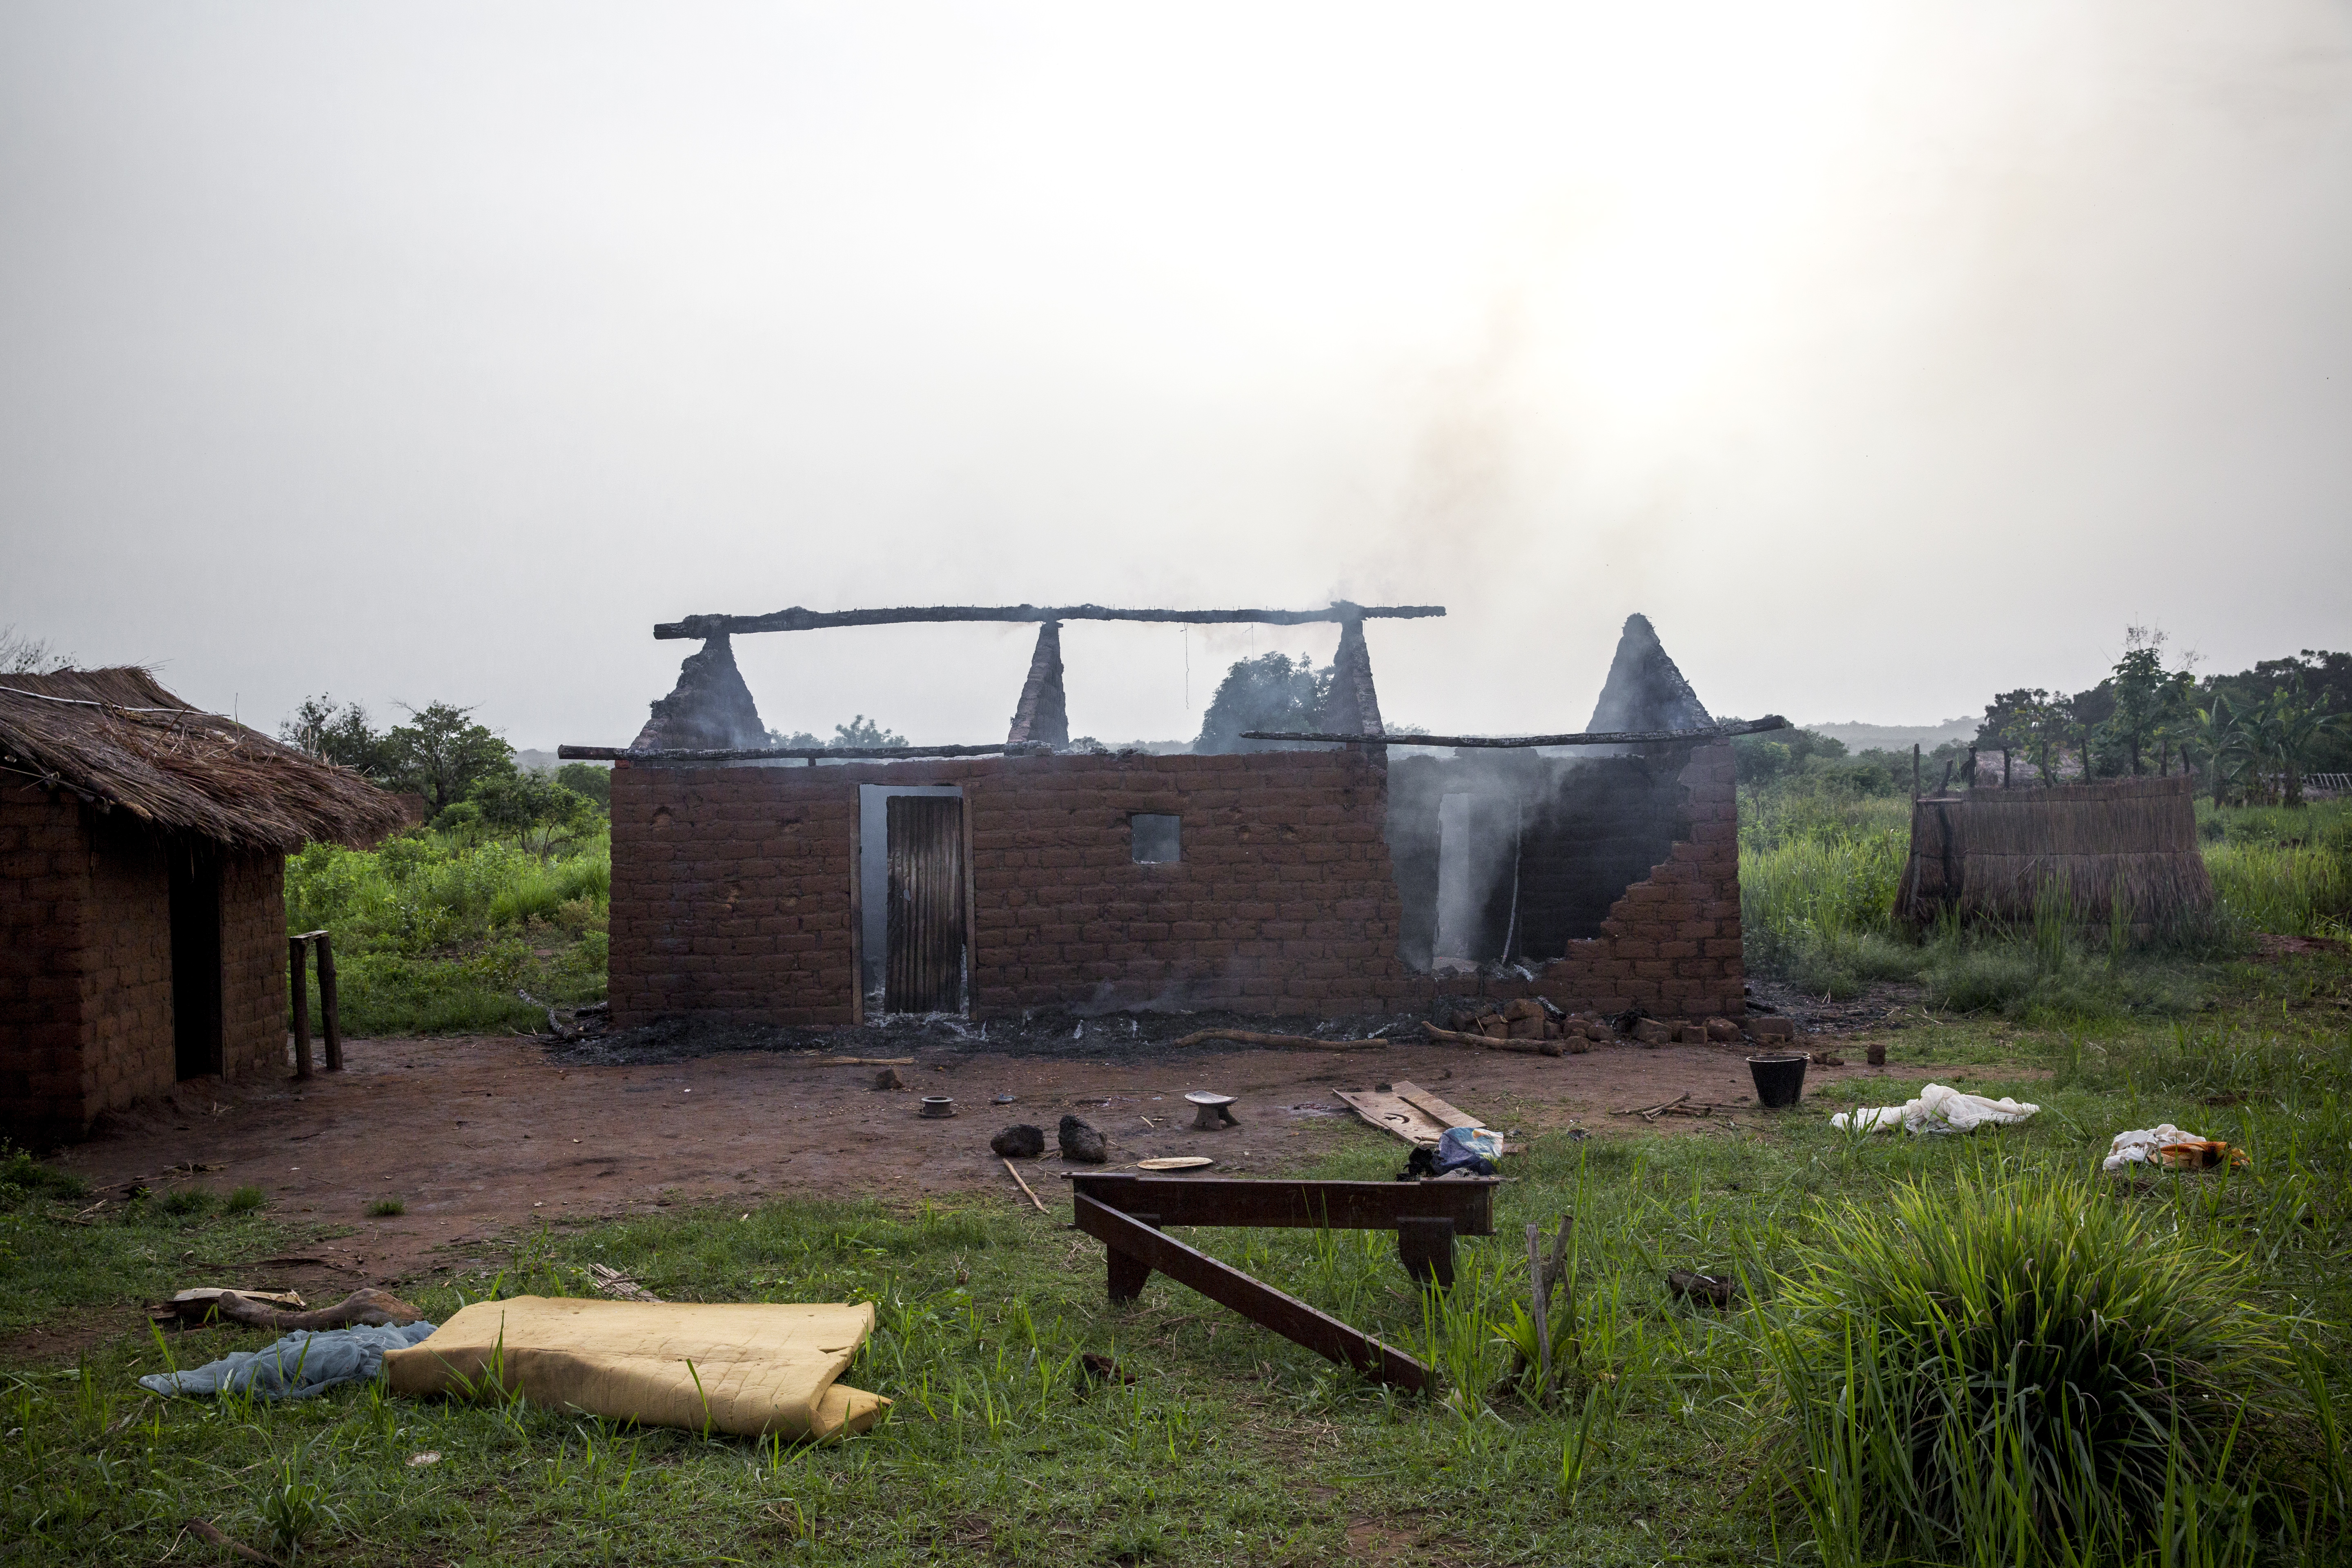 Apr. 14, 2014. Gulinga, near Grimari. A house burns where ex-Séléka fighters had killed three christians—two men and a woman—and reportedly kidnapped a fourth just 30 minutes earlier, accusing them of being anti-balaka. An ex-Séléka colonel who admitted to the killing said the woman was collateral damage, of sorts, and that the men were the targets.